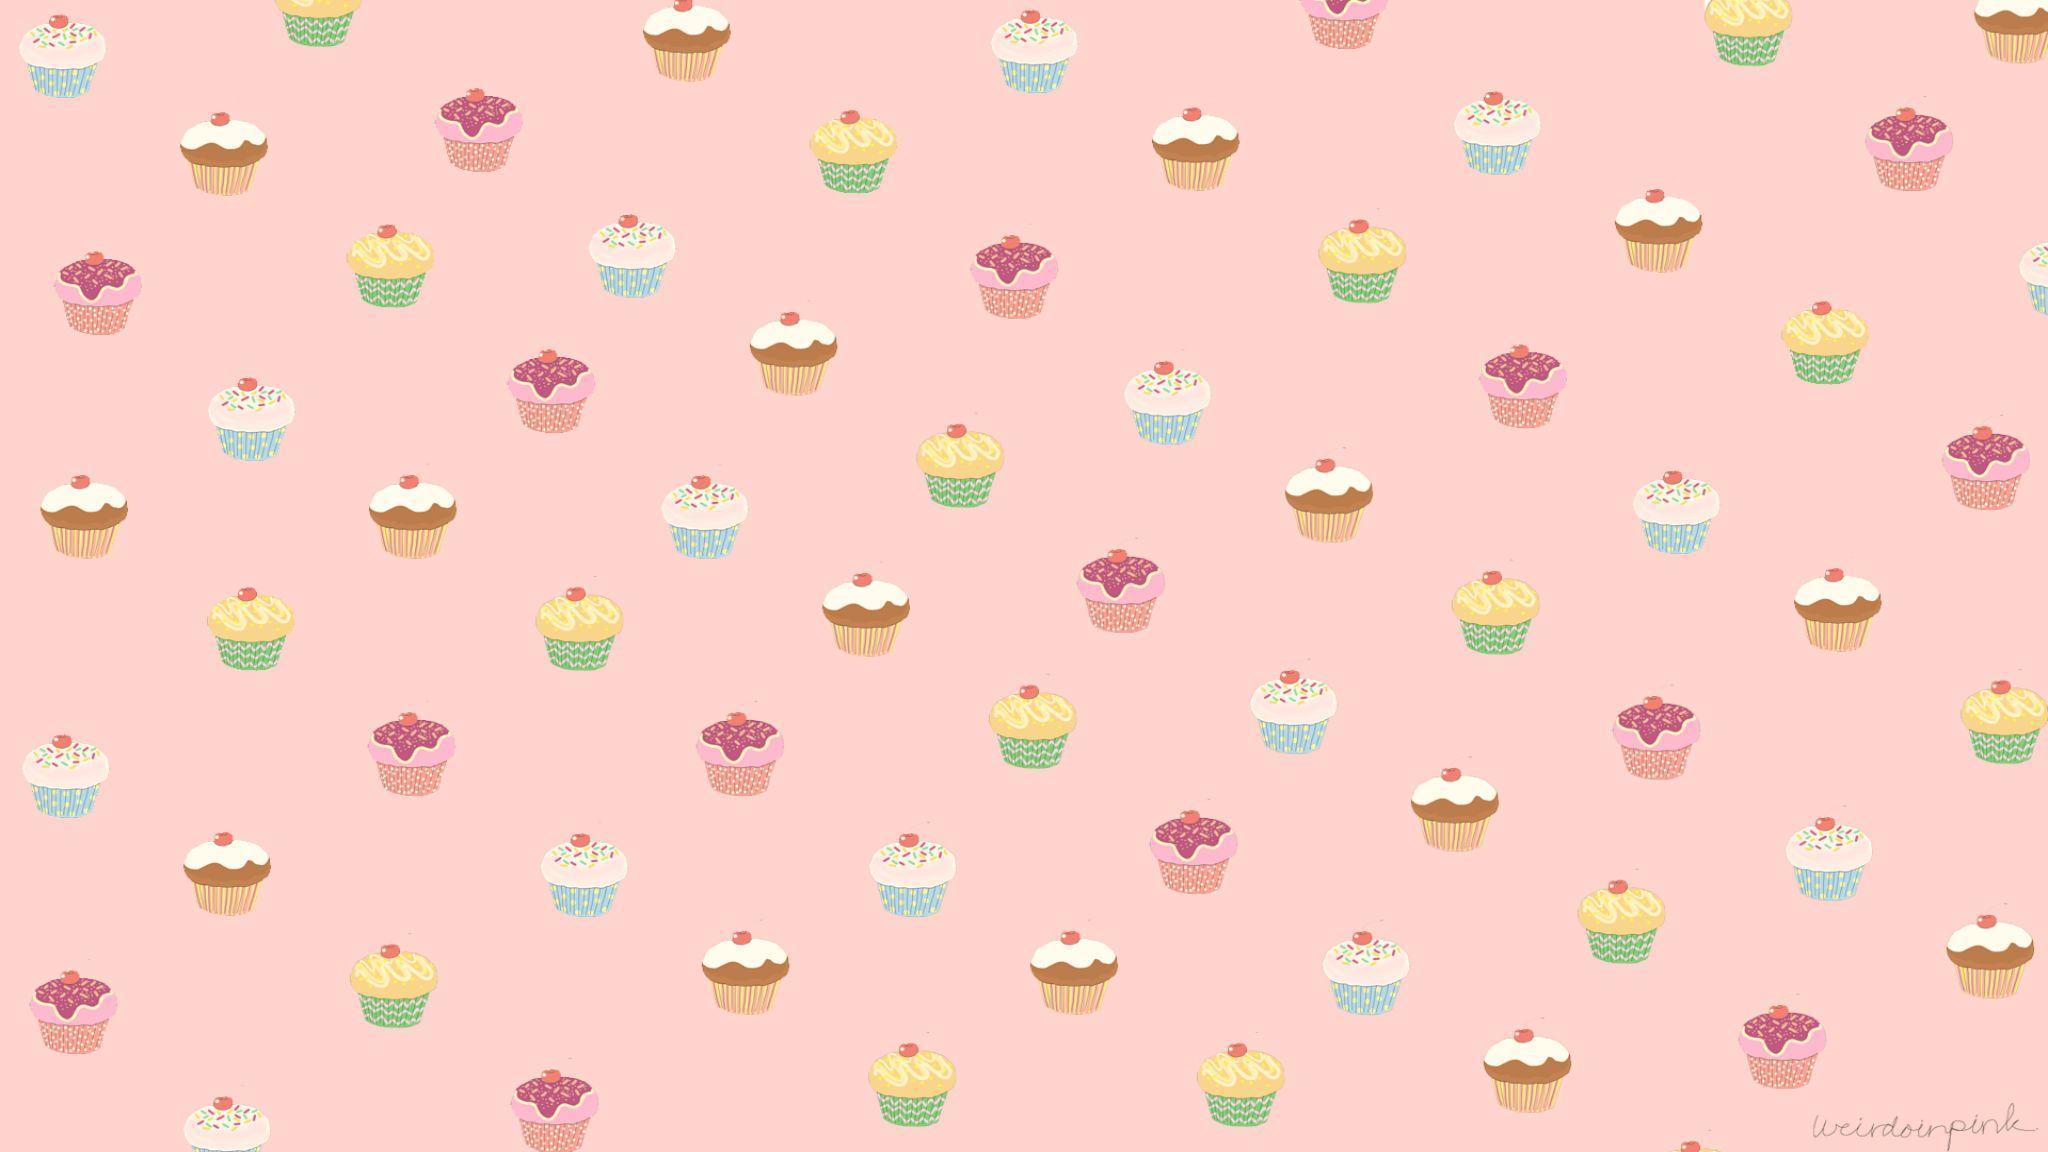 2048 X 1152 Cute Wallpapers Top Free 2048 X 1152 Cute Backgrounds Wallpaperaccess